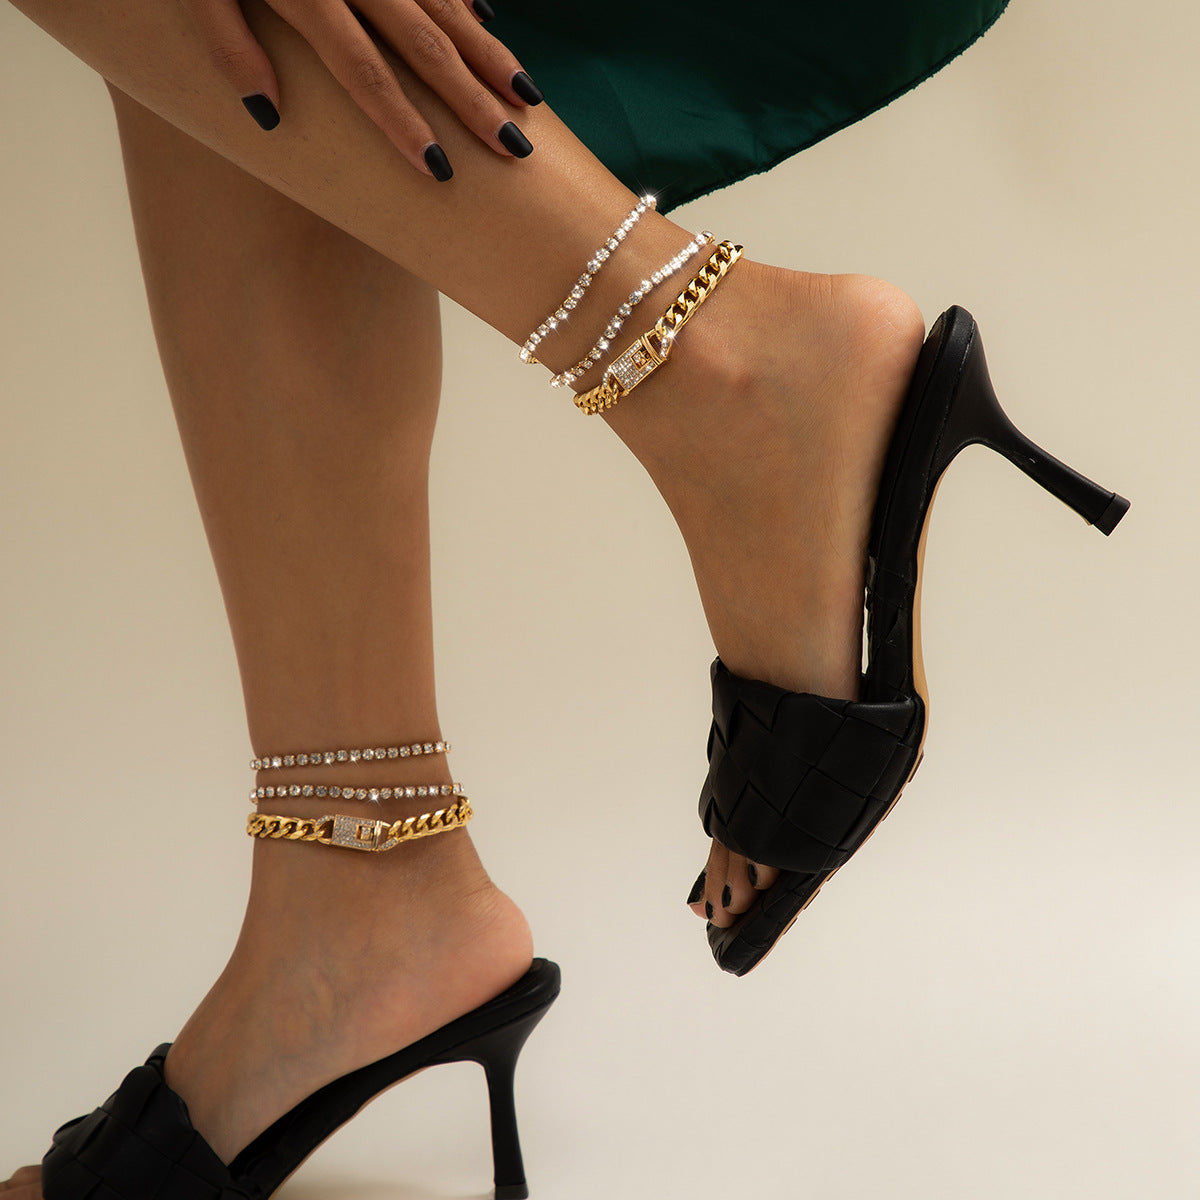 Our anklets are the ultimate summer accessory.
shopuntilhappy.com/products/ornam…

#jewelrydraw #jewelrynature #jewelrymakingclasses #ankletoebracelet #ankletnearme #ankletmen #ankletieheels